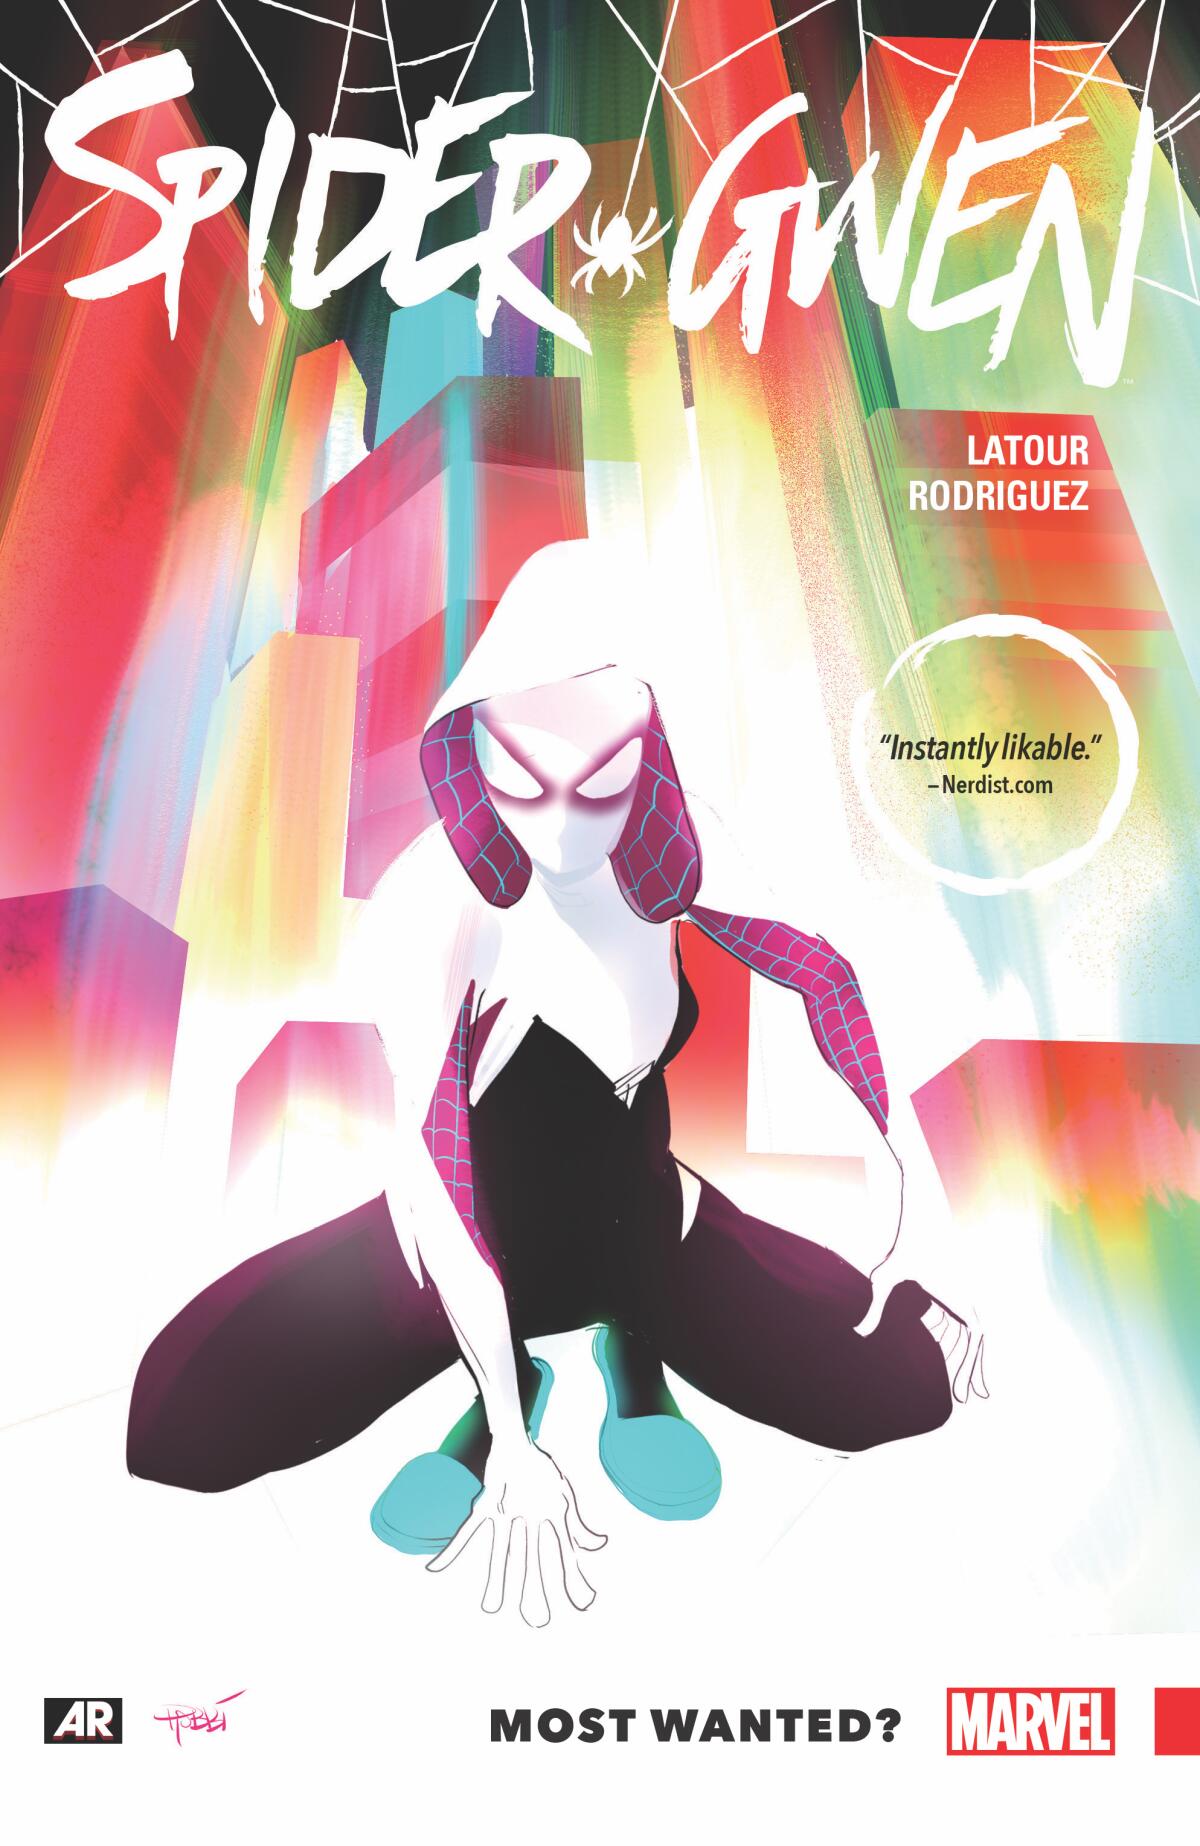 Spider-Woman on the cover of "Spider-Gwen" No. 1